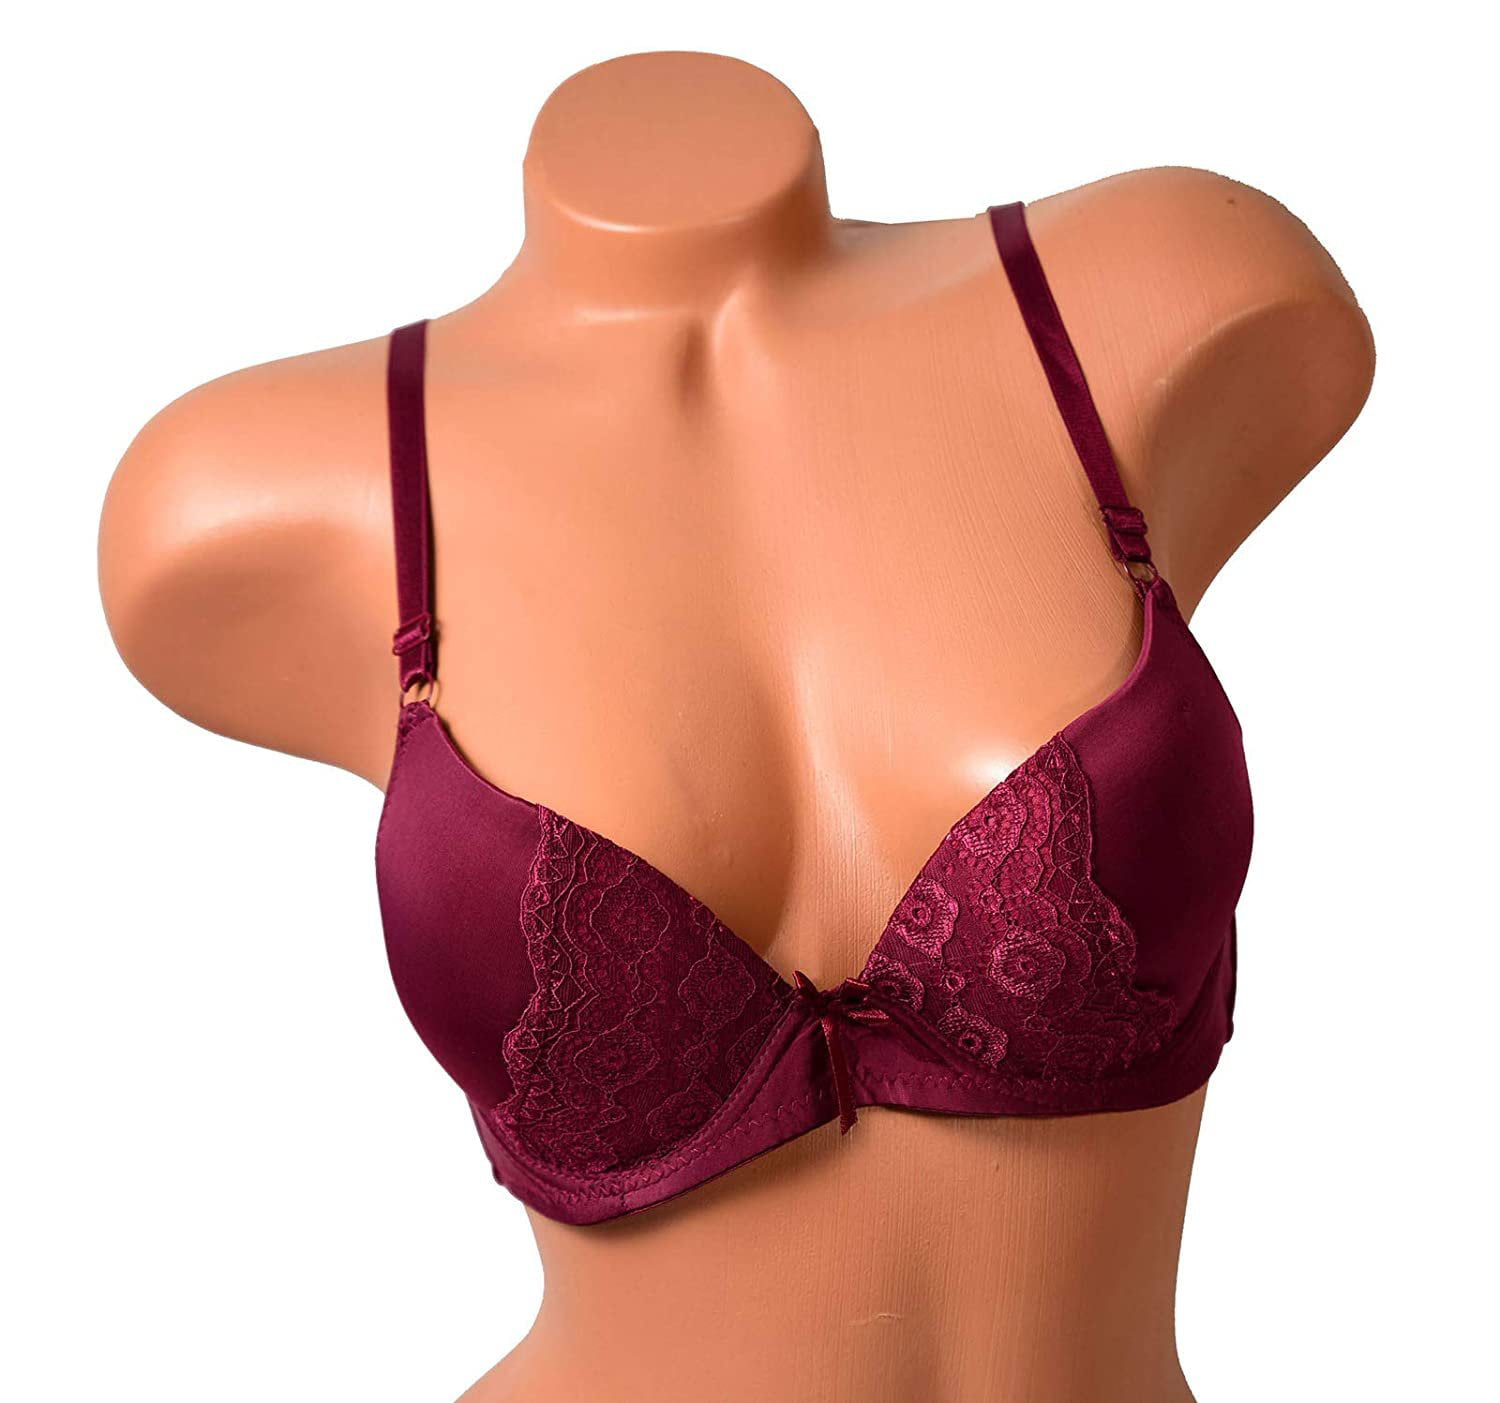 6 Pieces Full Cup Lace Gentle Push Up Pushup B/C Bra (34B